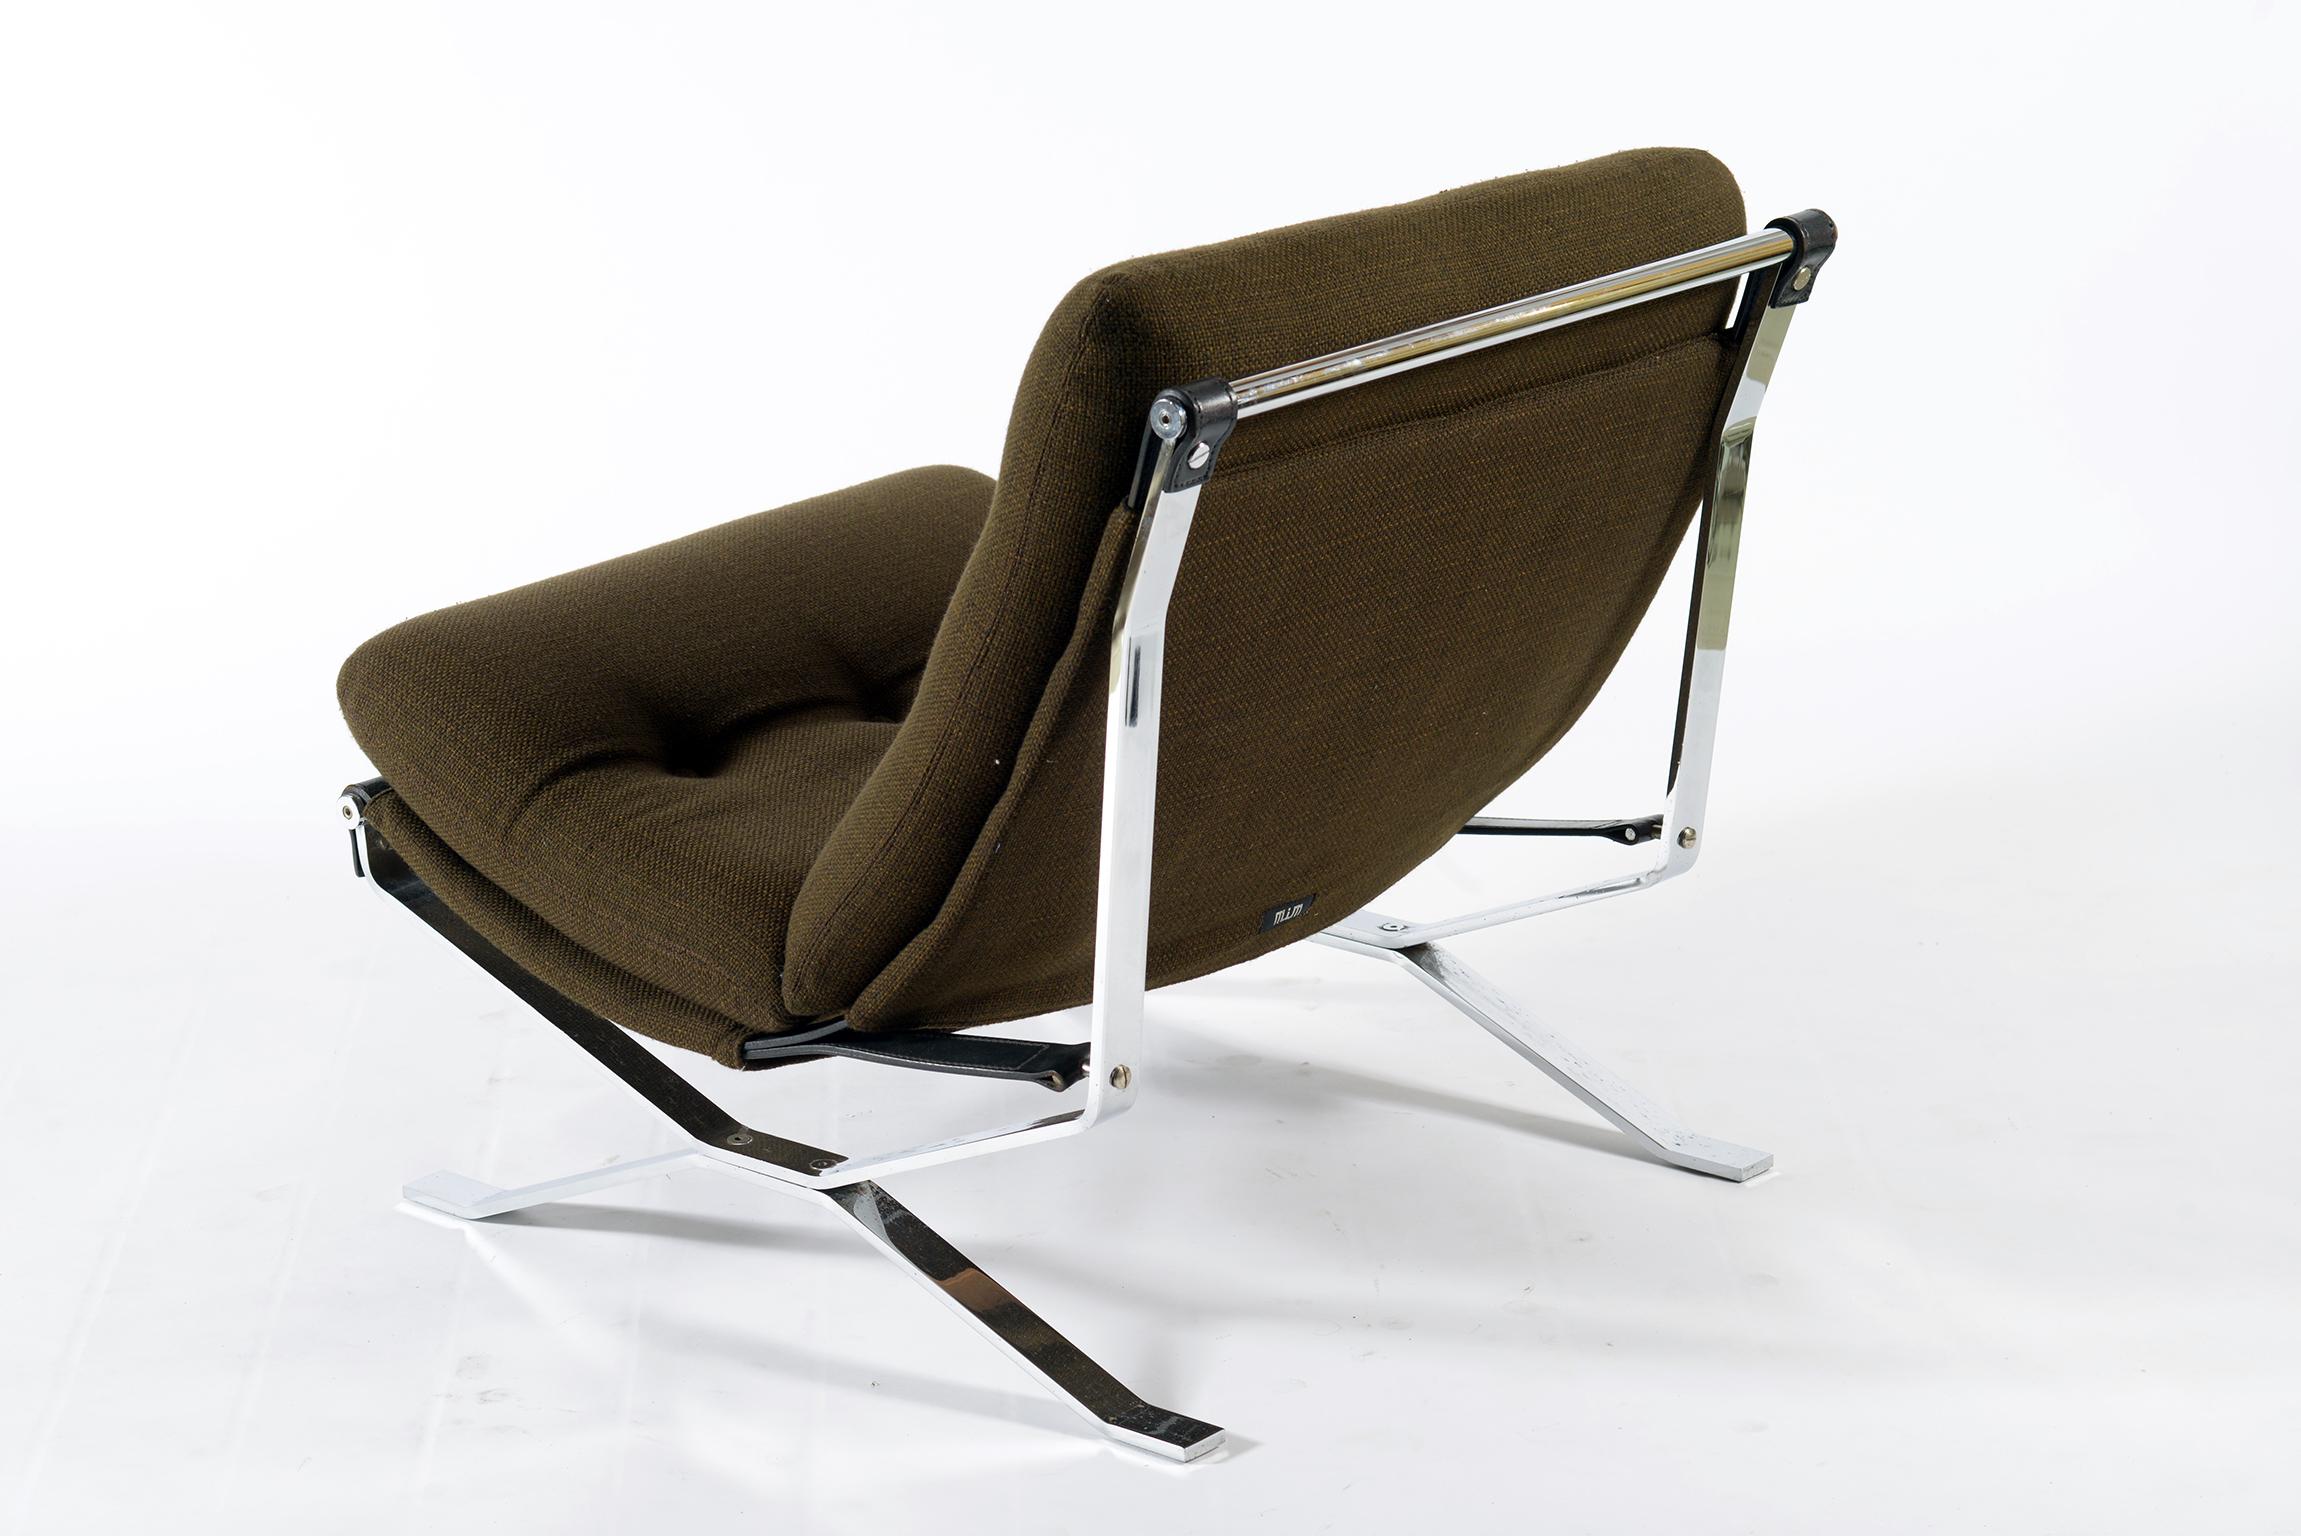 Three armchairs with cross-shaped chromed metal structure, cushions covered with original fabric are suspended by leather straps. Signature of the MIM Roma Italy (Modern Italian Furniture) manufacture. Modern Italian Furniture 1960.
Sitting really